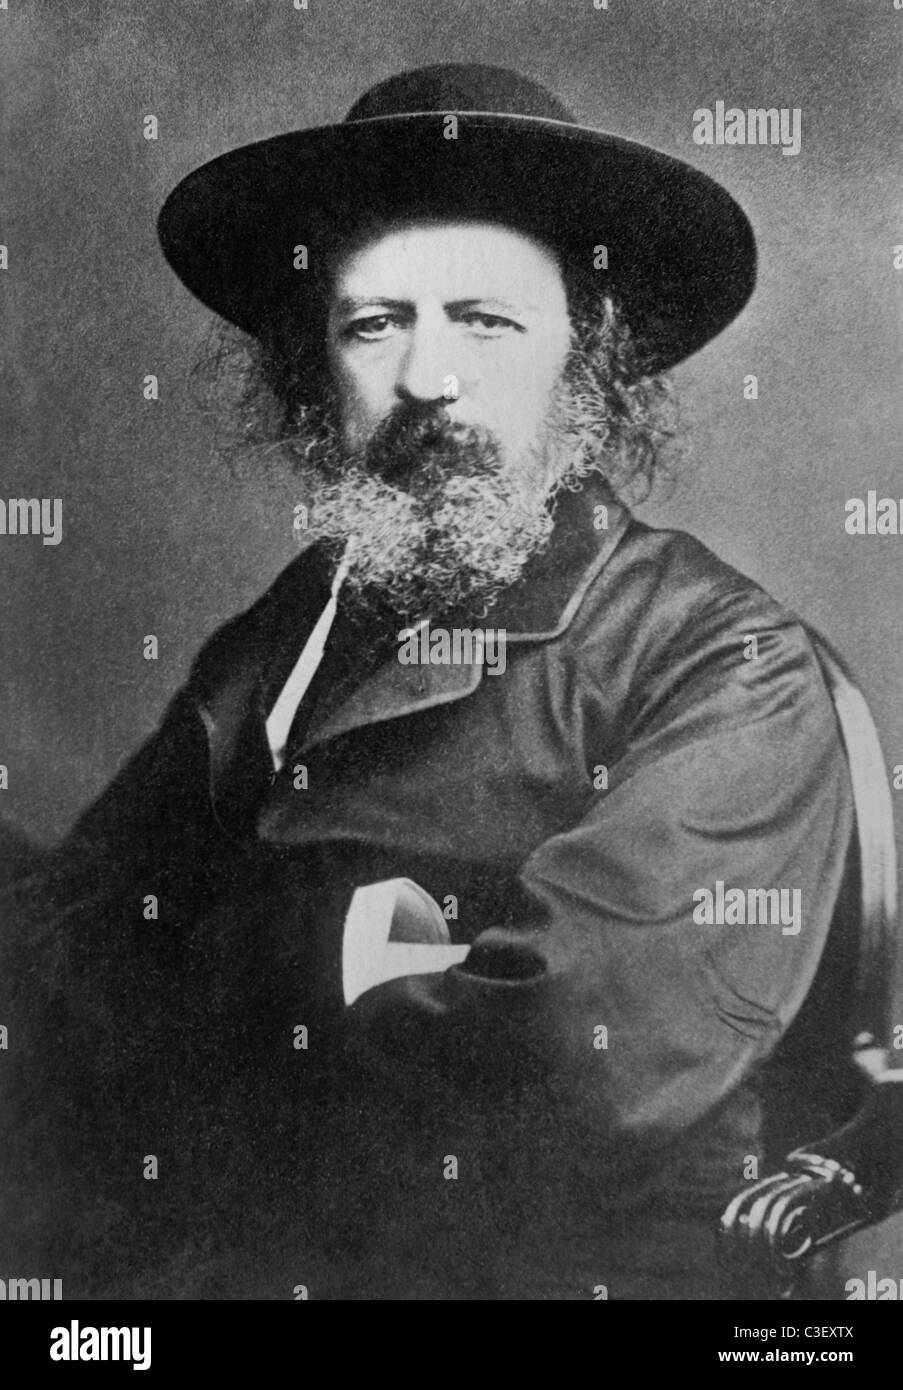 Vintage portrait photo of poet Alfred Lord Tennyson (1809 - 1892). Stock Photo